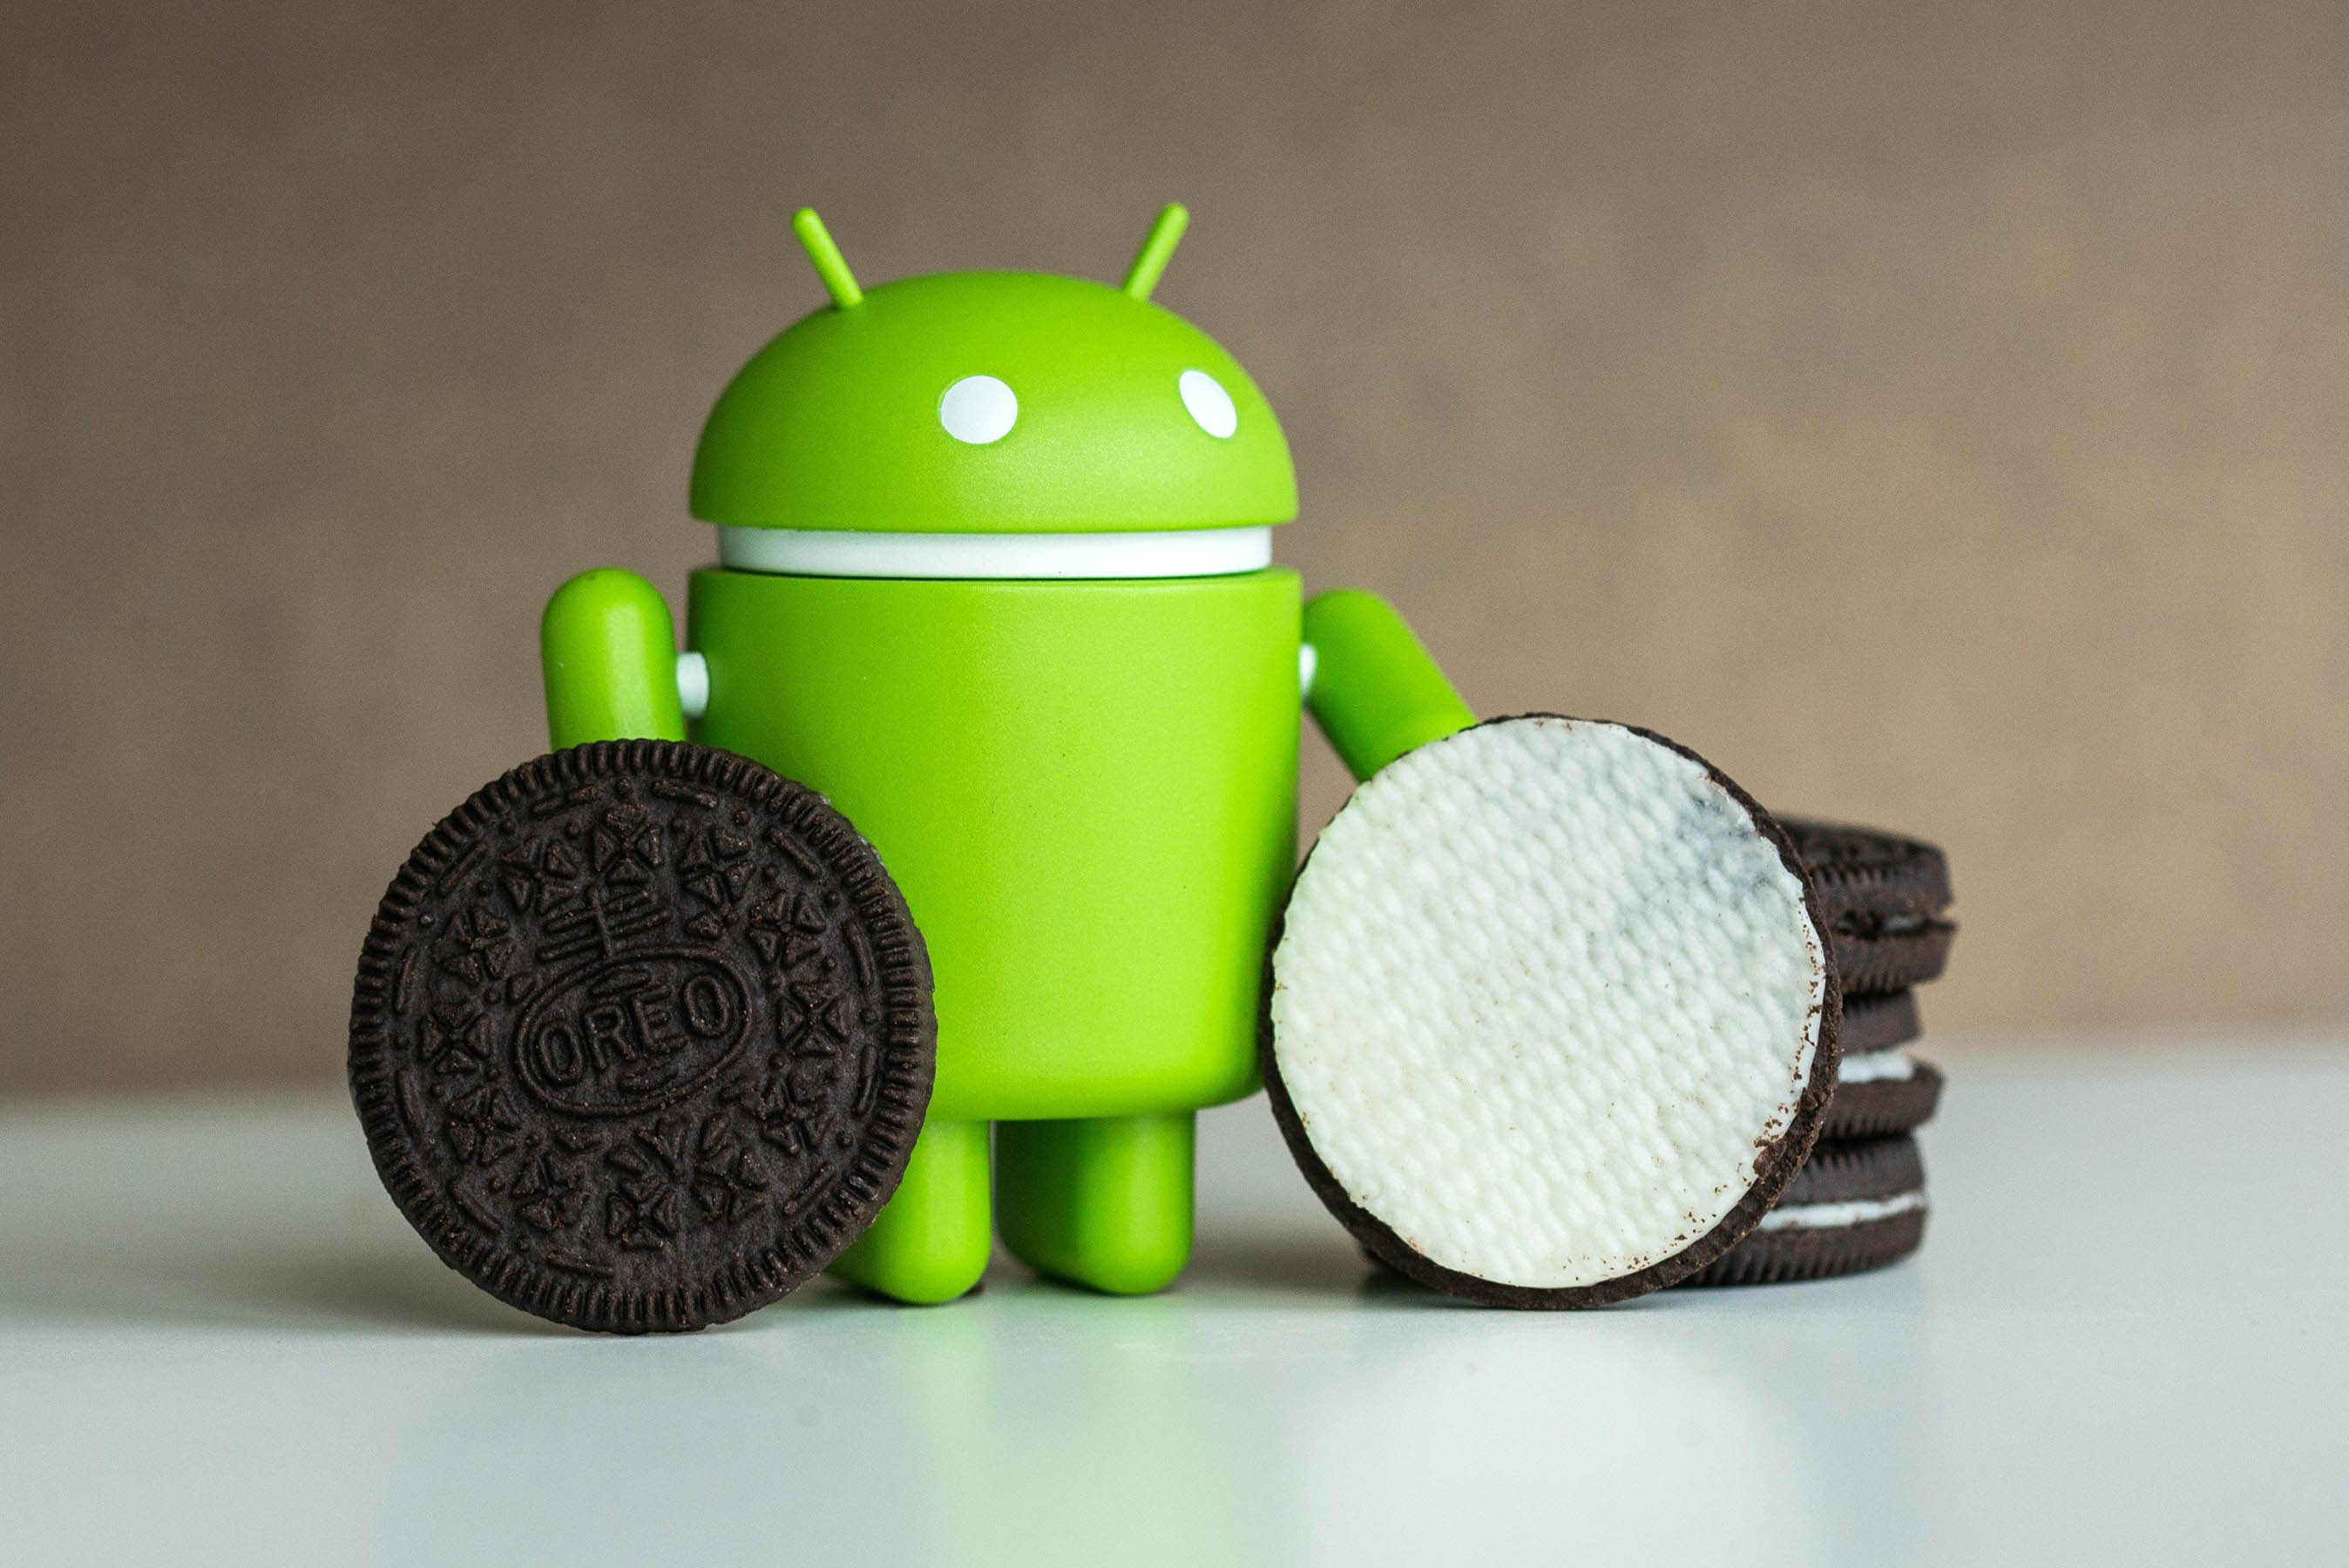 Android Orio 8.1,Developer Preview,Google,Update,December 2017,new features,Neural Networks API,NNAPI,Pixel Visual Core,SoC,visual tweaks,Android Oreo Easter egg,Pixel 2 device,Pixel 2 and Pixel 2 XL device,Google Android developers site,